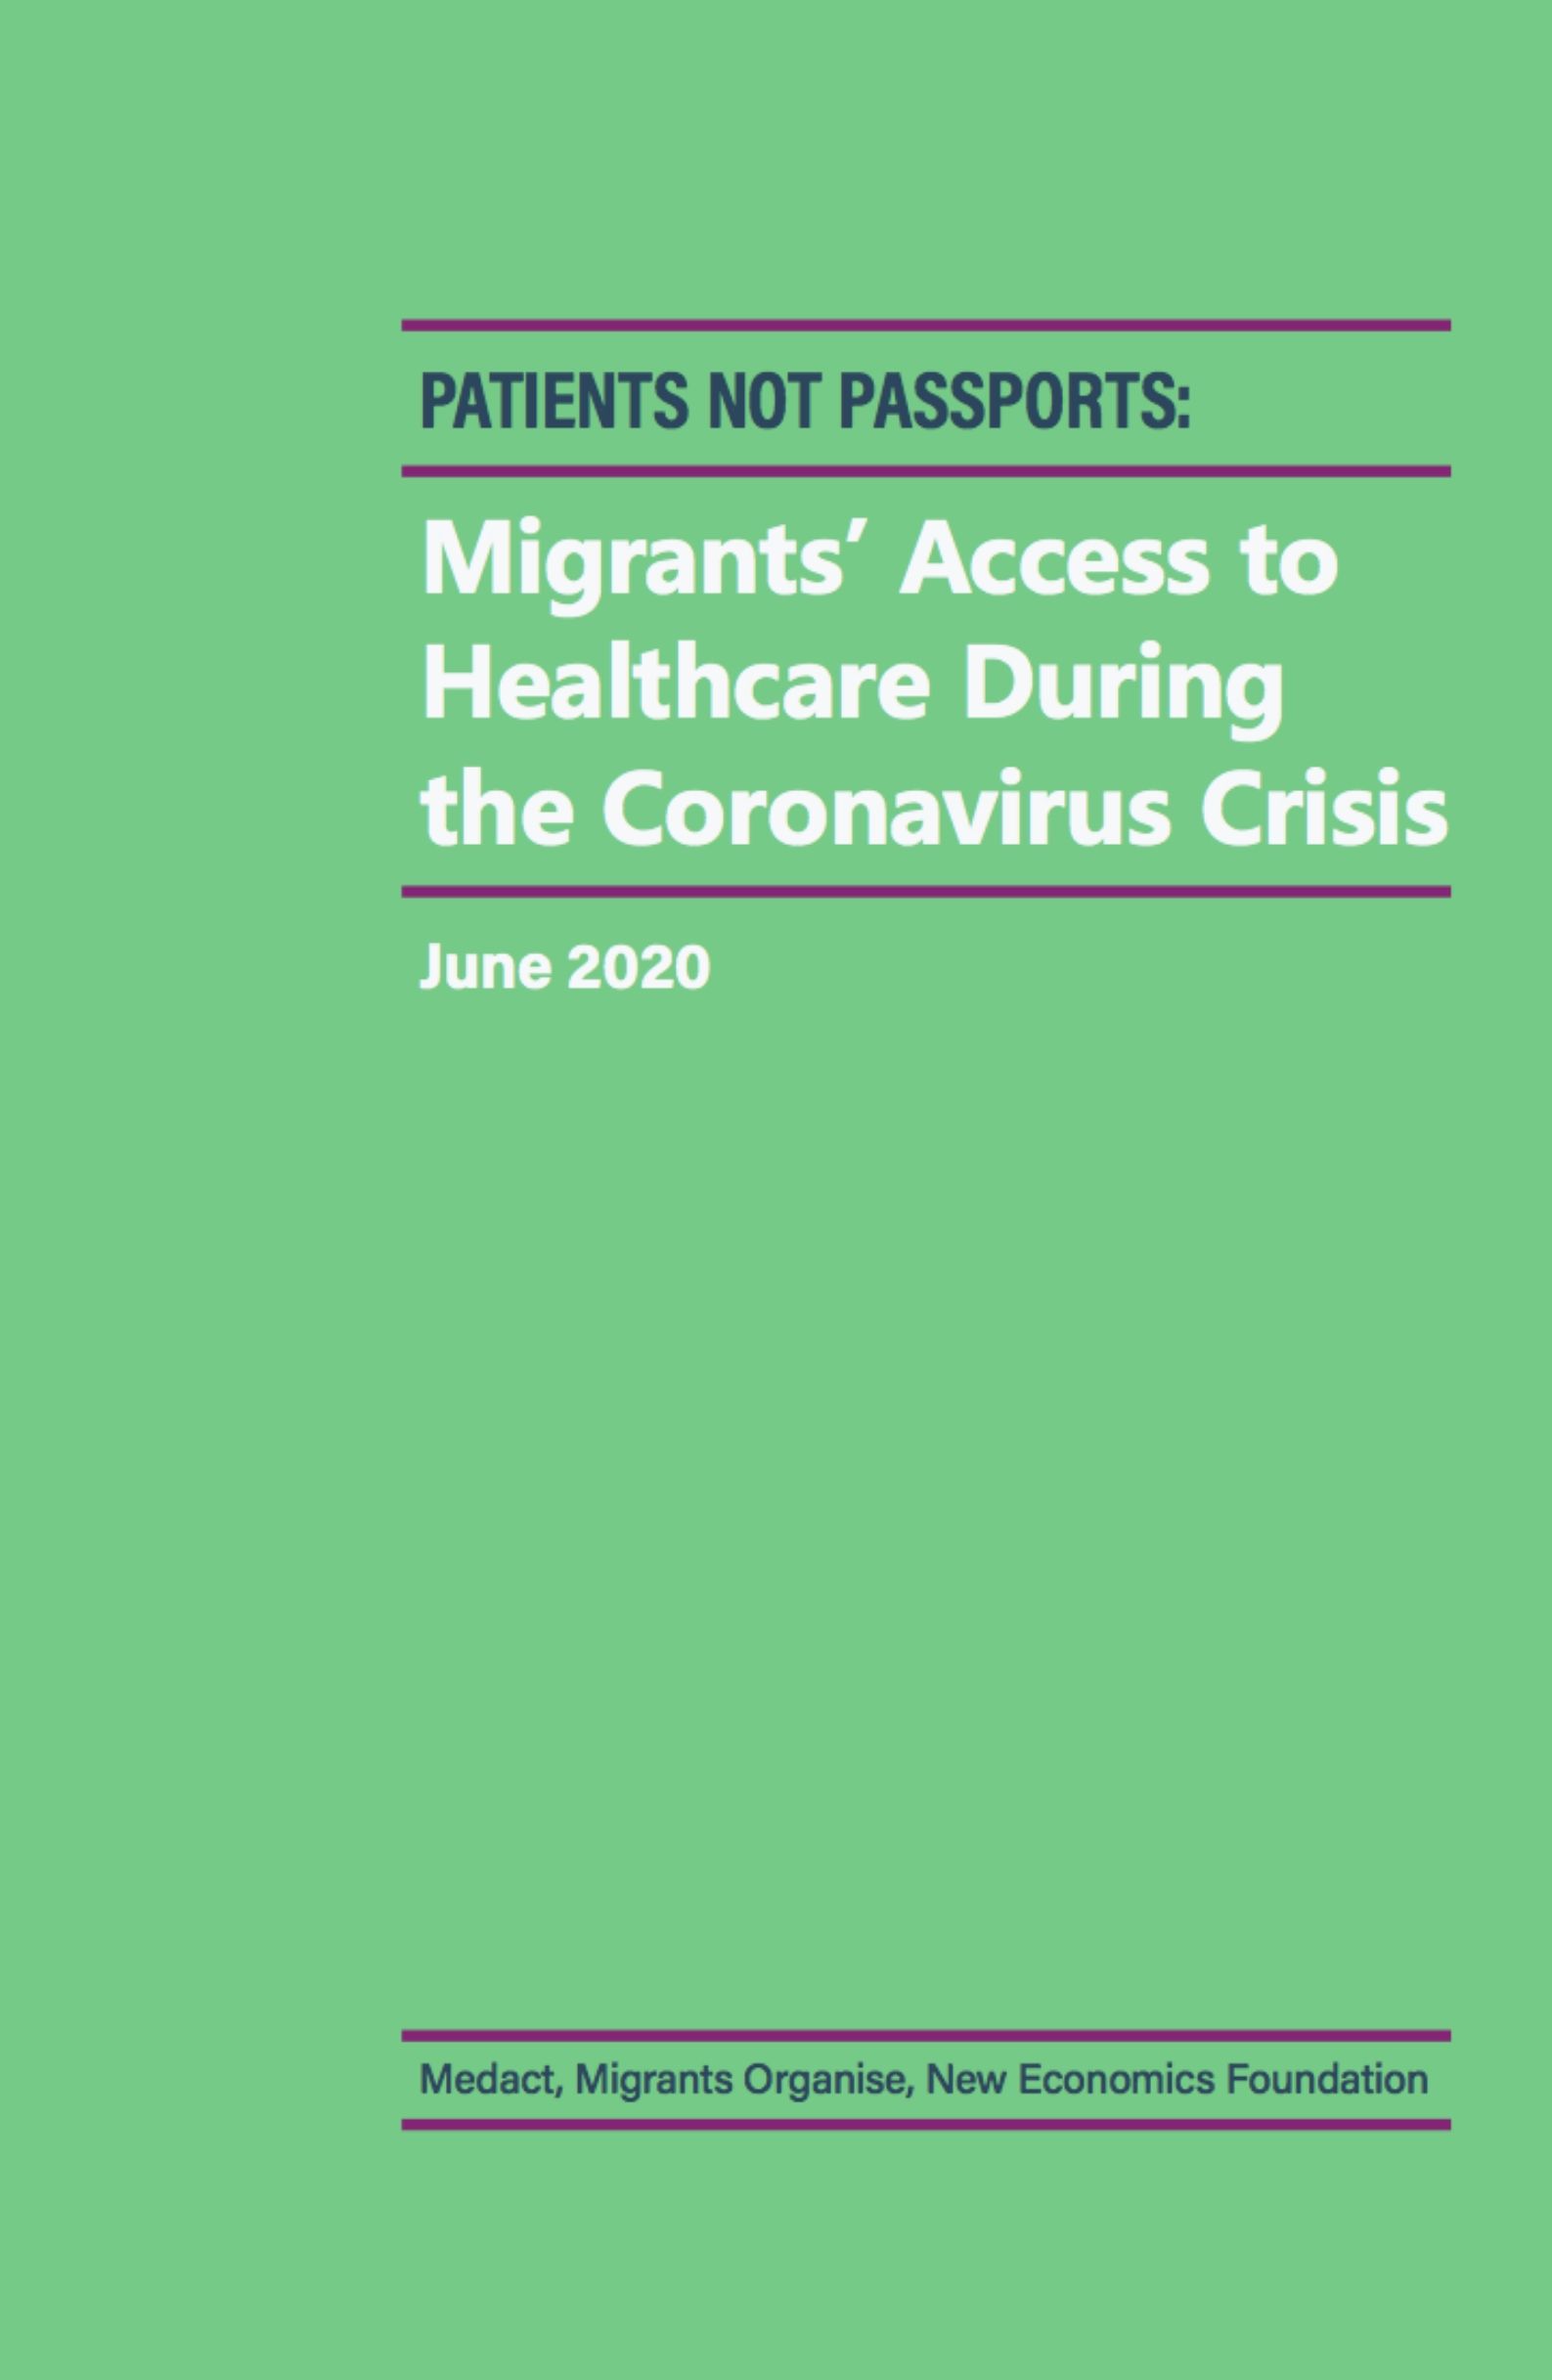 Patients Not Passports – Migrants’ Access to Healthcare During the Coronavirus Crisis